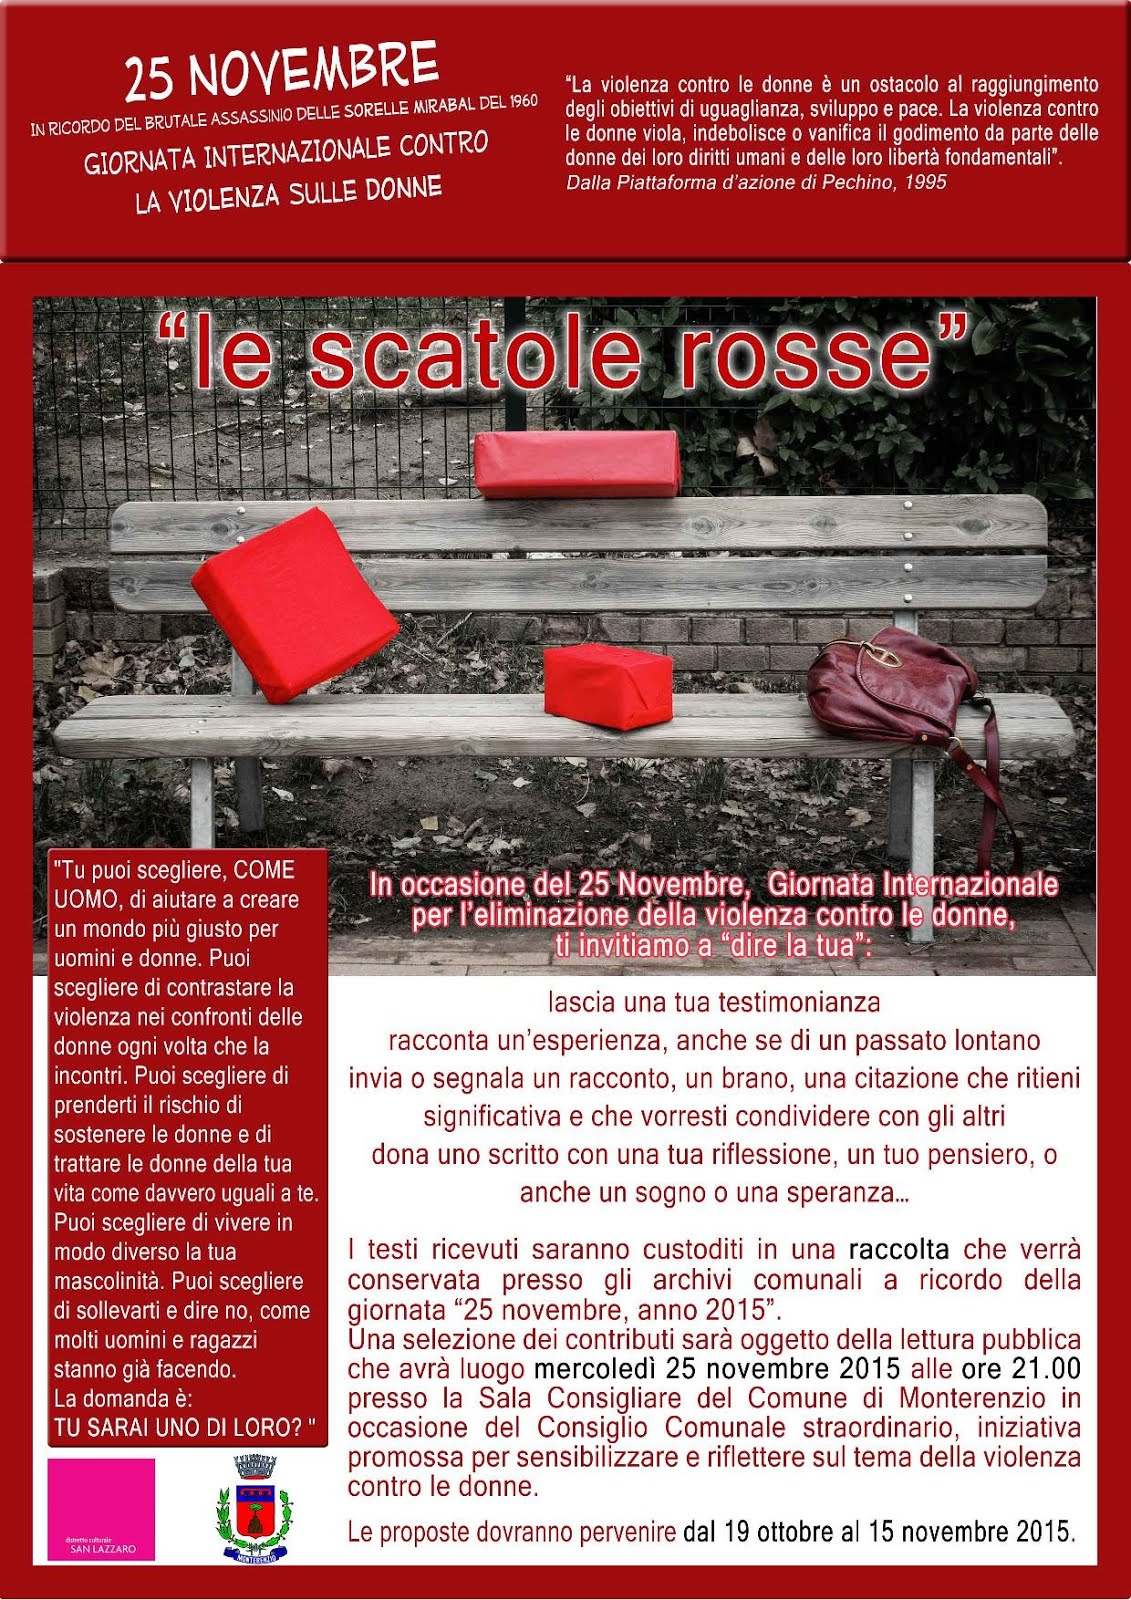 SCATOLE ROSSE